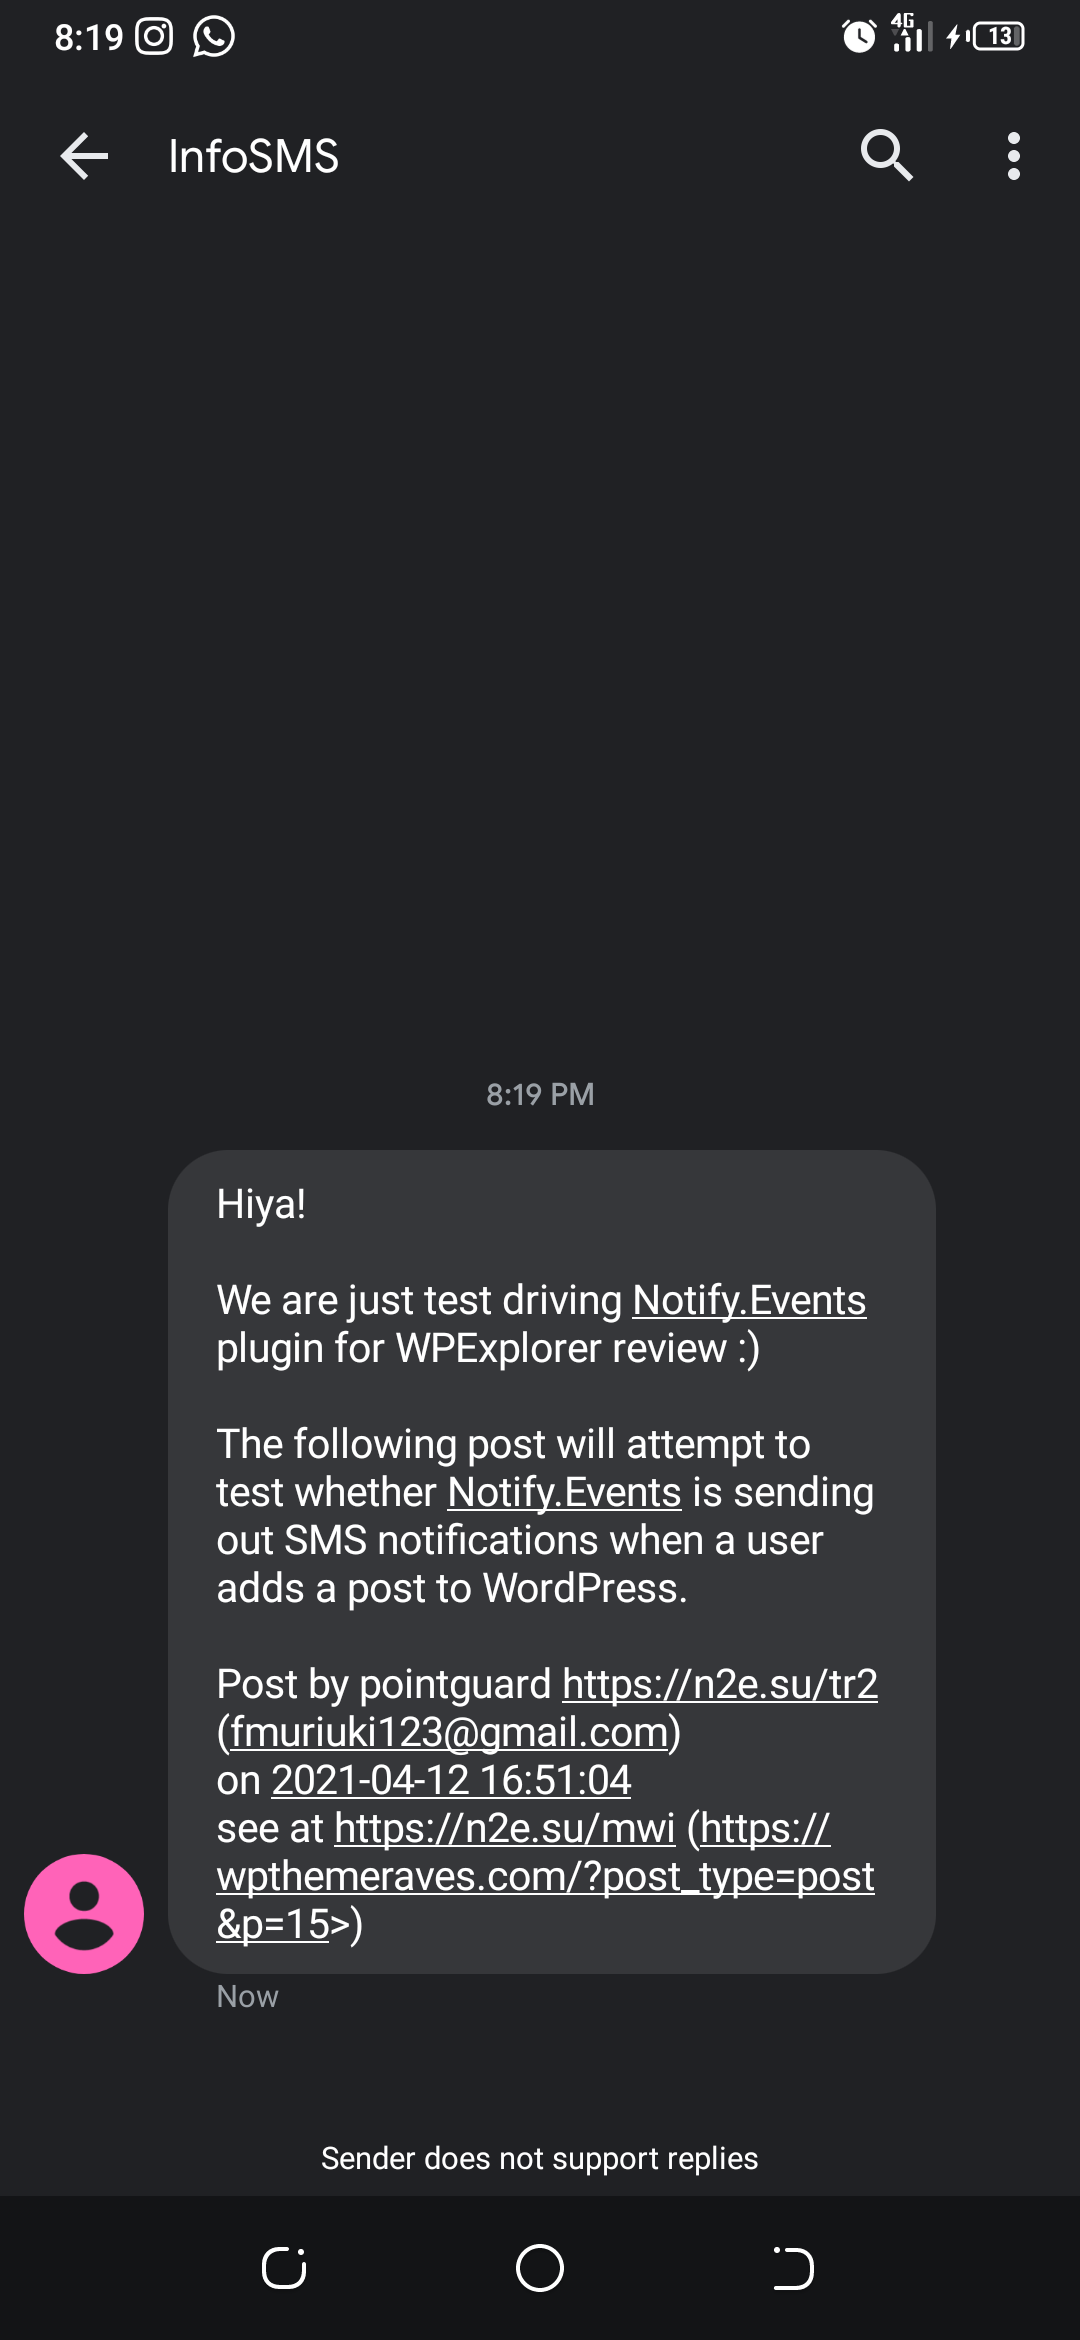 Notify Events sms